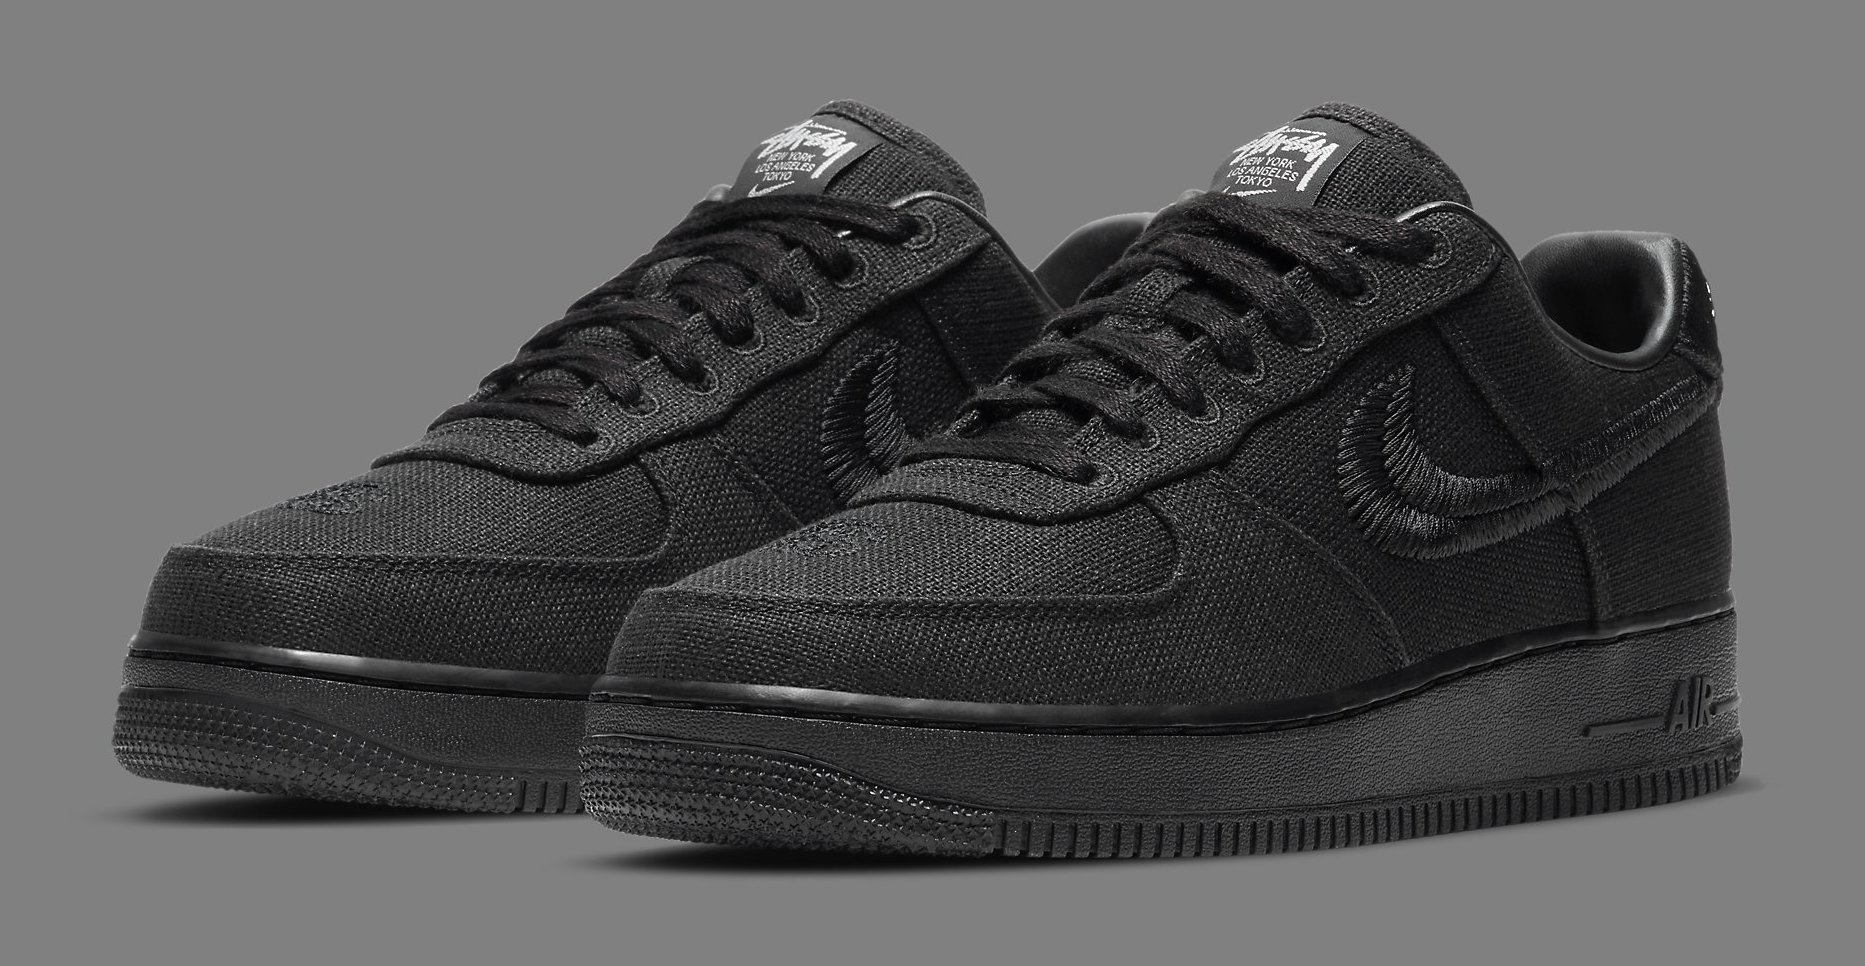 Stussy's Sold-Out Nike Air Force 1 Is Releasing Again